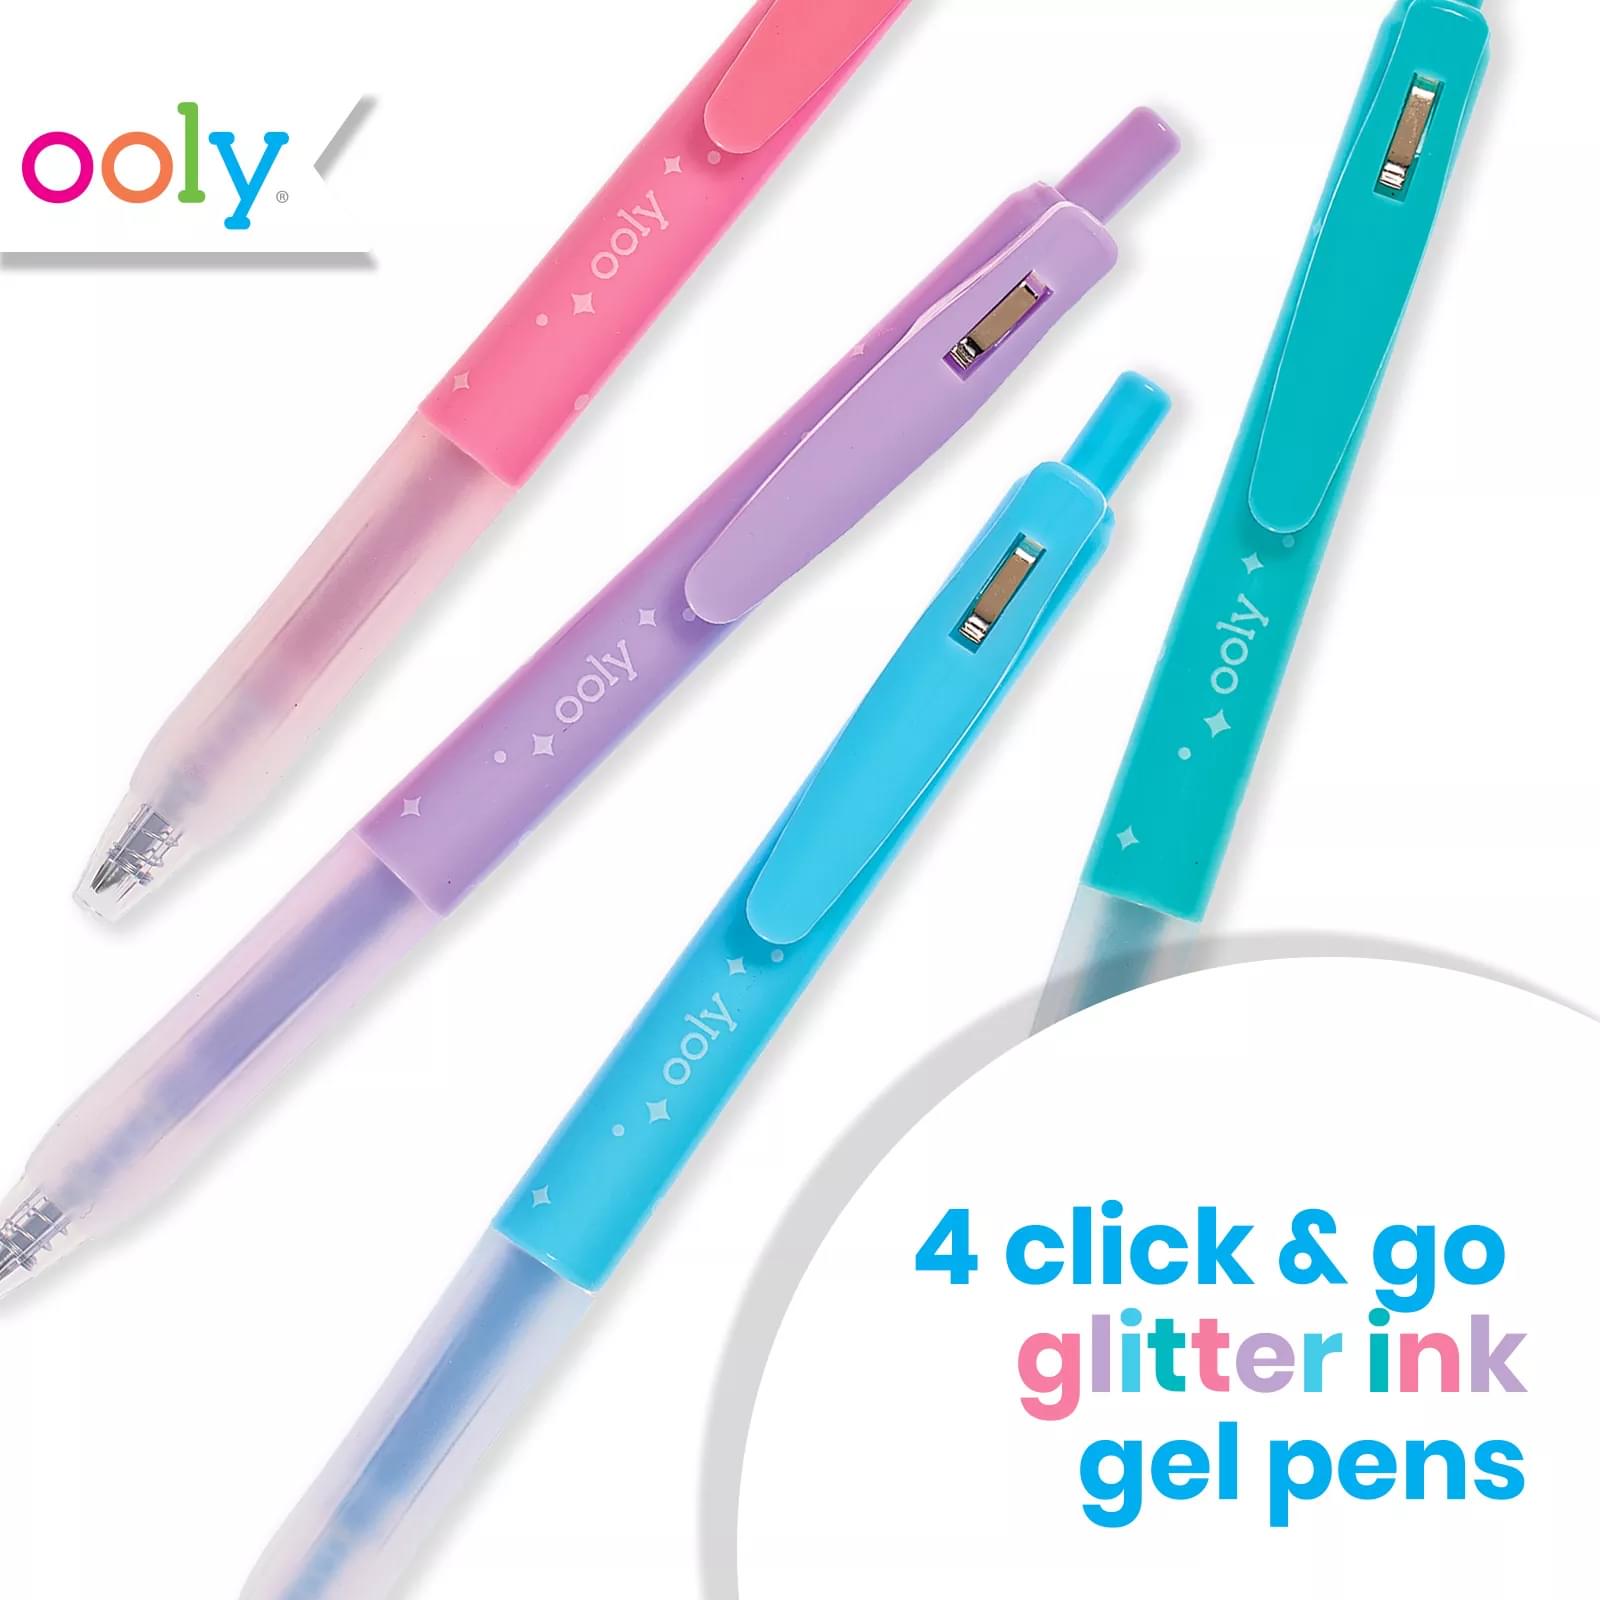 Oh My Glitter! Gel Pens - Set of 4 by OOLY